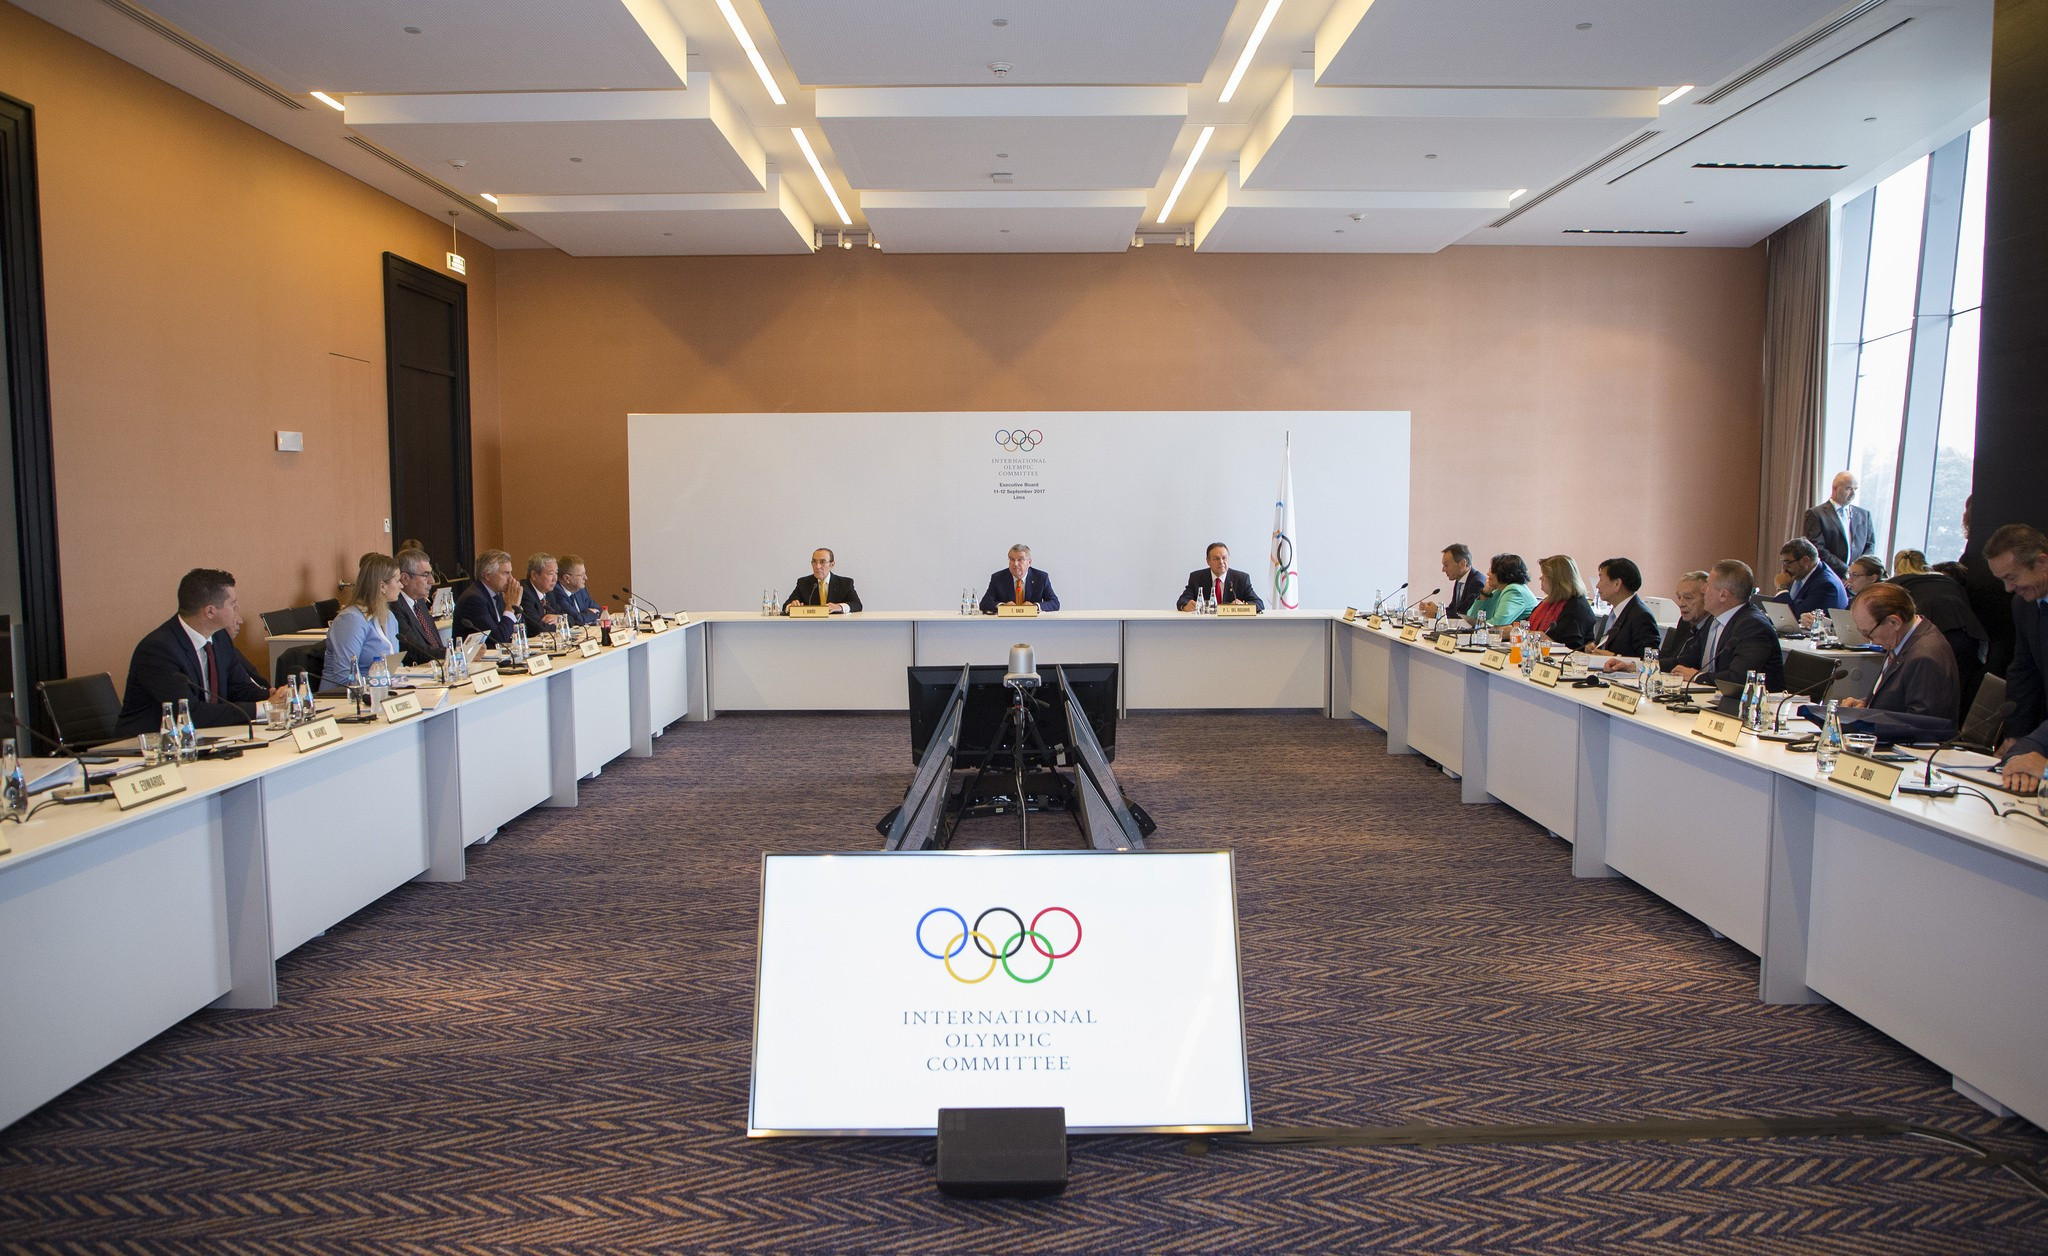 The press conference followed an IOC Executive Board meeting, where Pyeongchang 2018 Winter Olympic preparations were discussed ©IOC